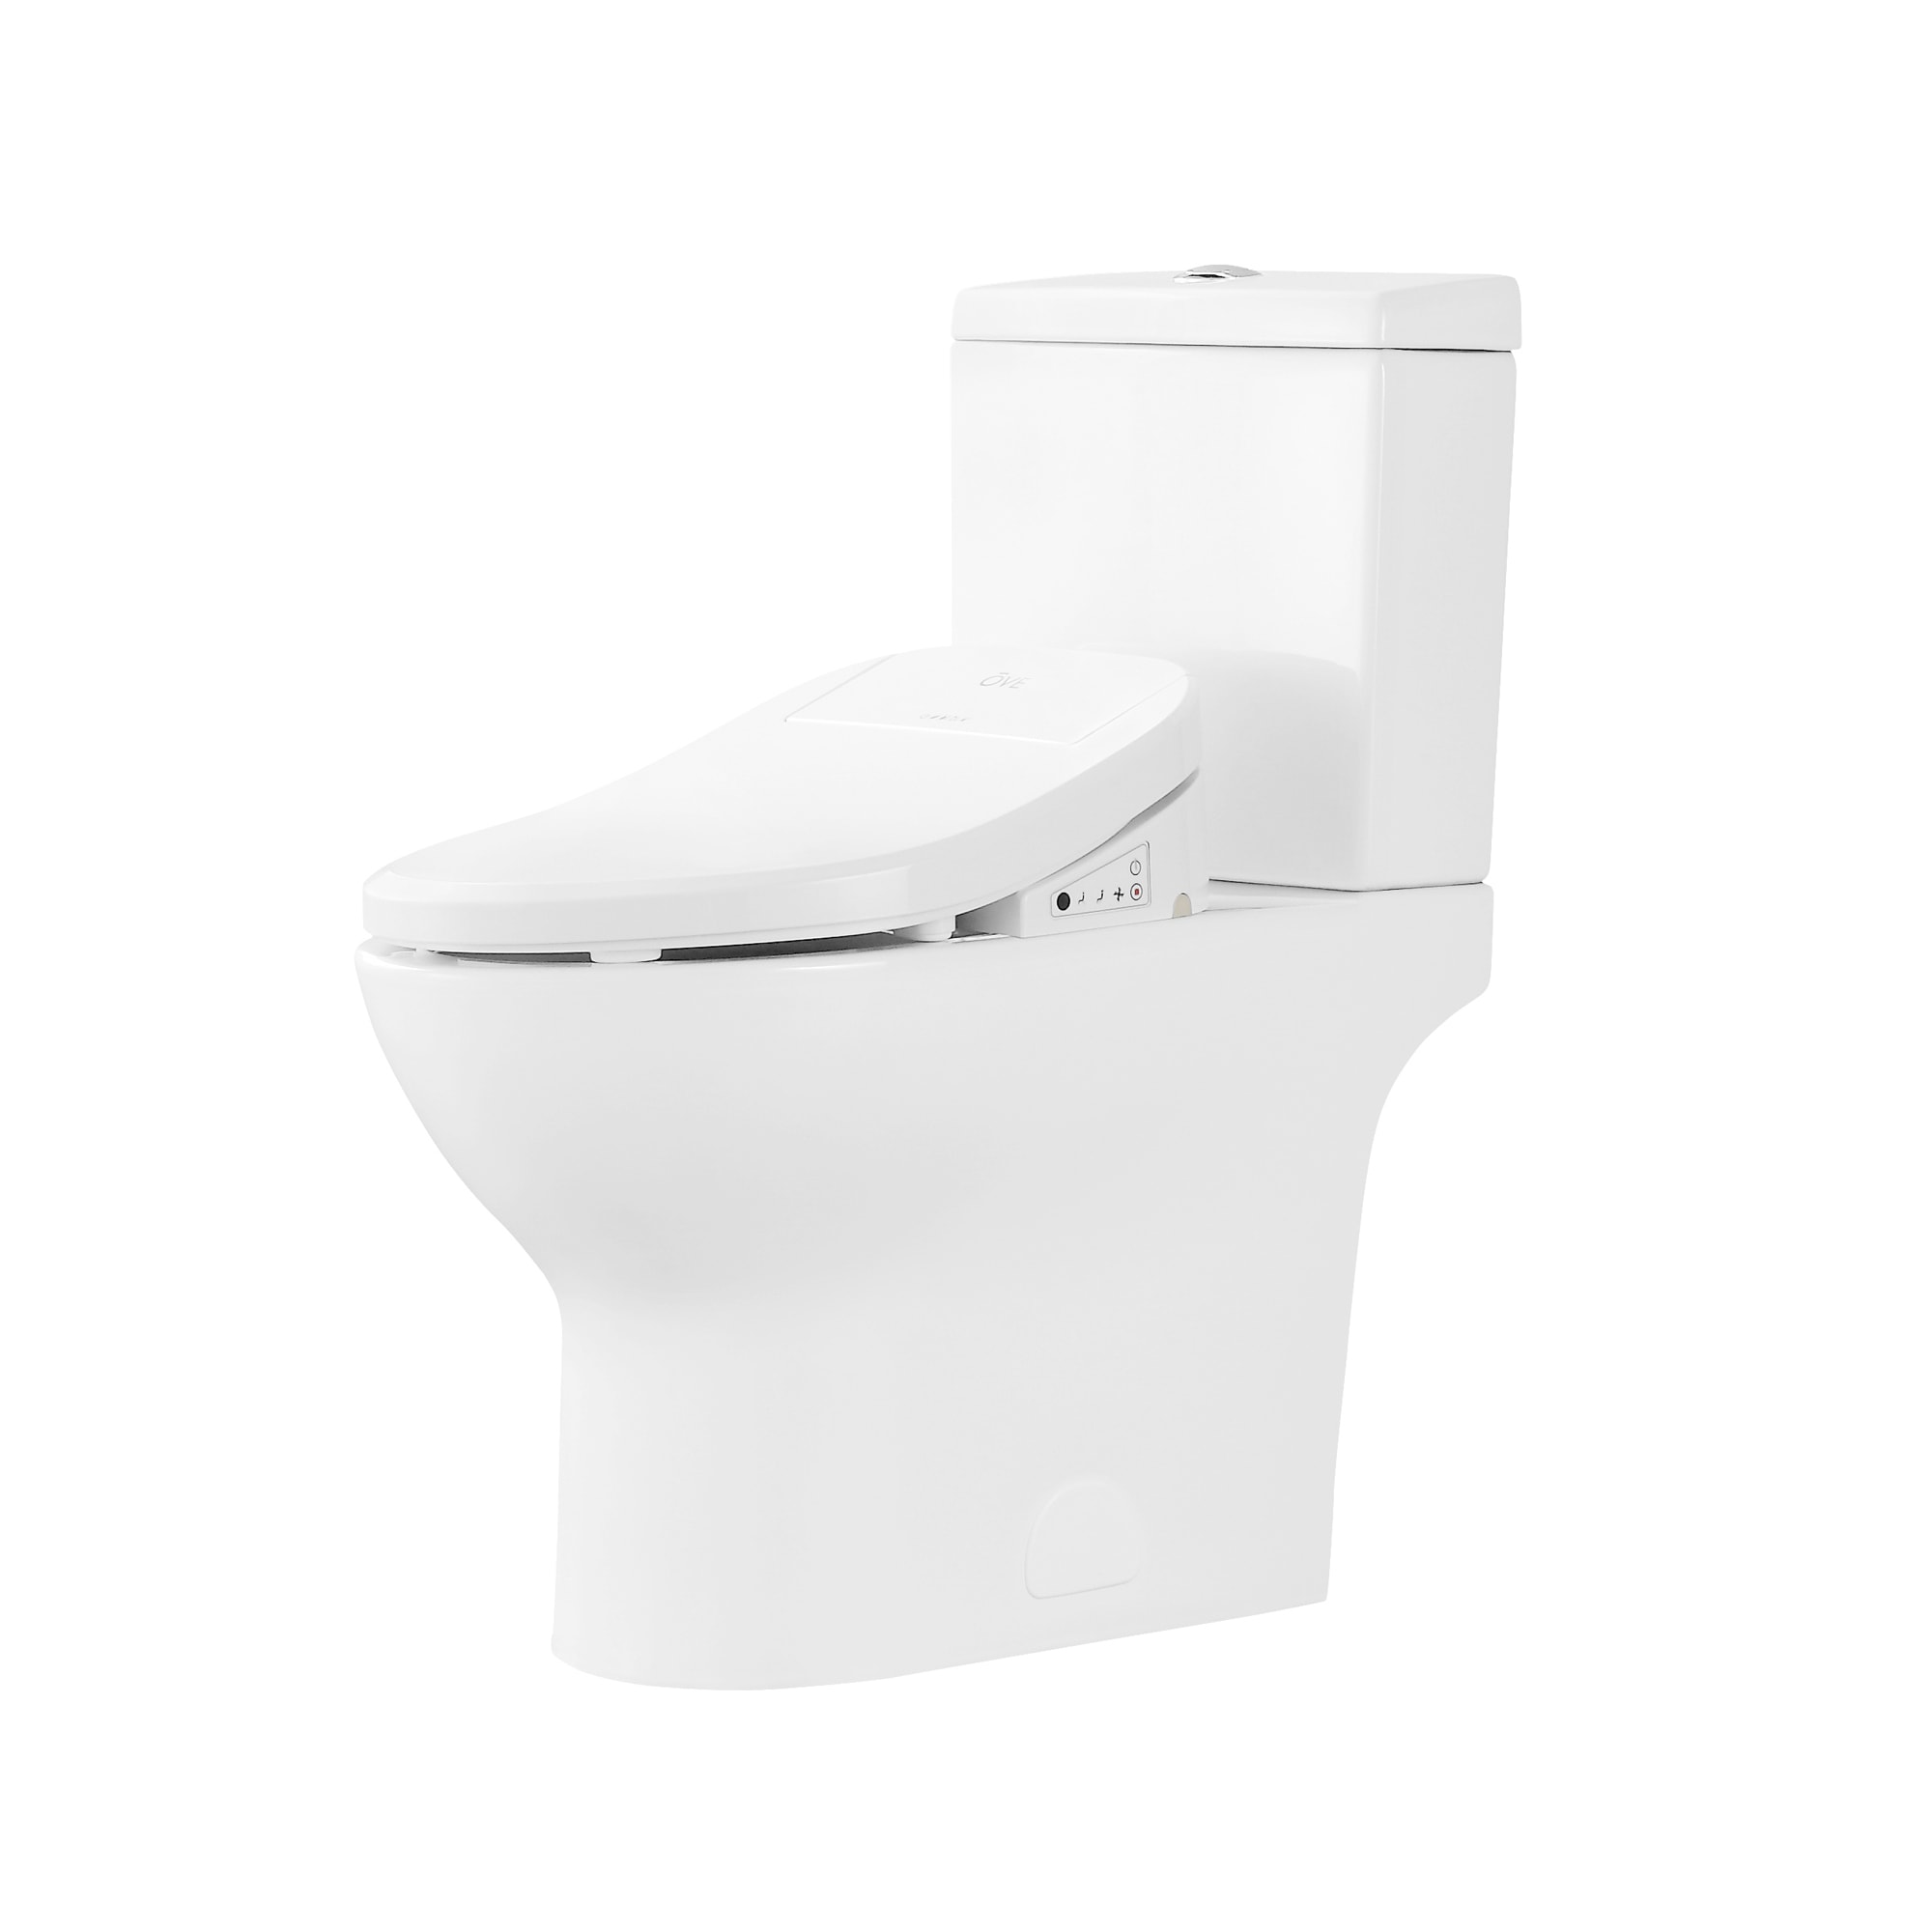 1-Piece 1.06 GPF Dual Flush U-Shaped Elongated LED Light Automatic Smart Toilet in White Seat Included